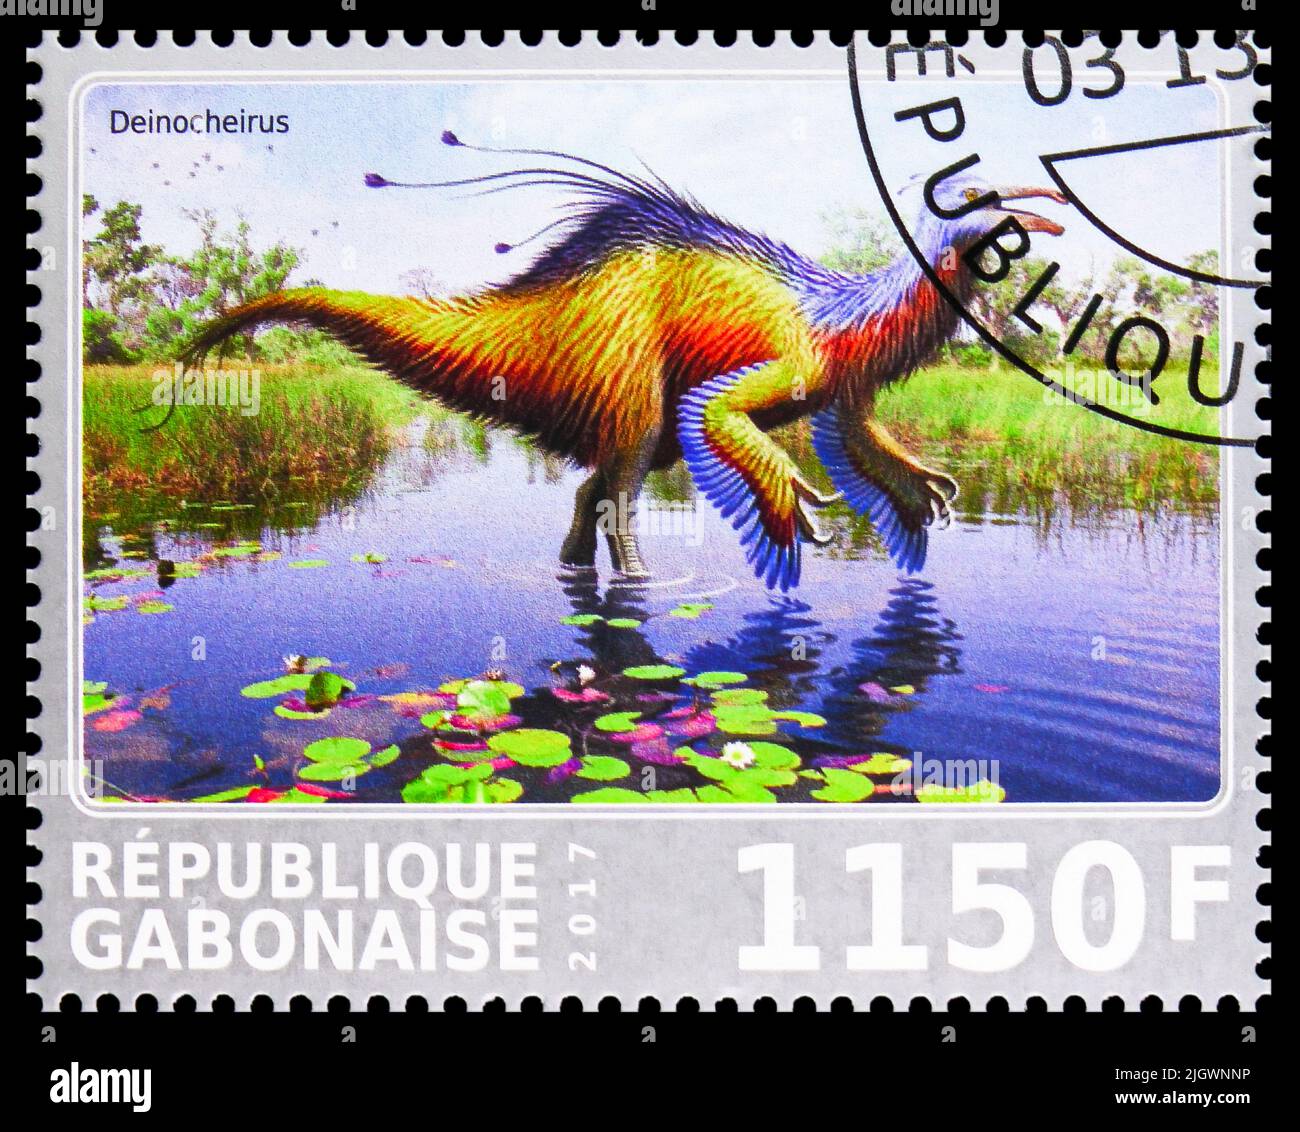 MOSCOW, RUSSIA - JUNE 17, 2022: Postage stamp printed in Gabon shows Deinocheirus, Dinosaurs serie, circa 2017 Stock Photo